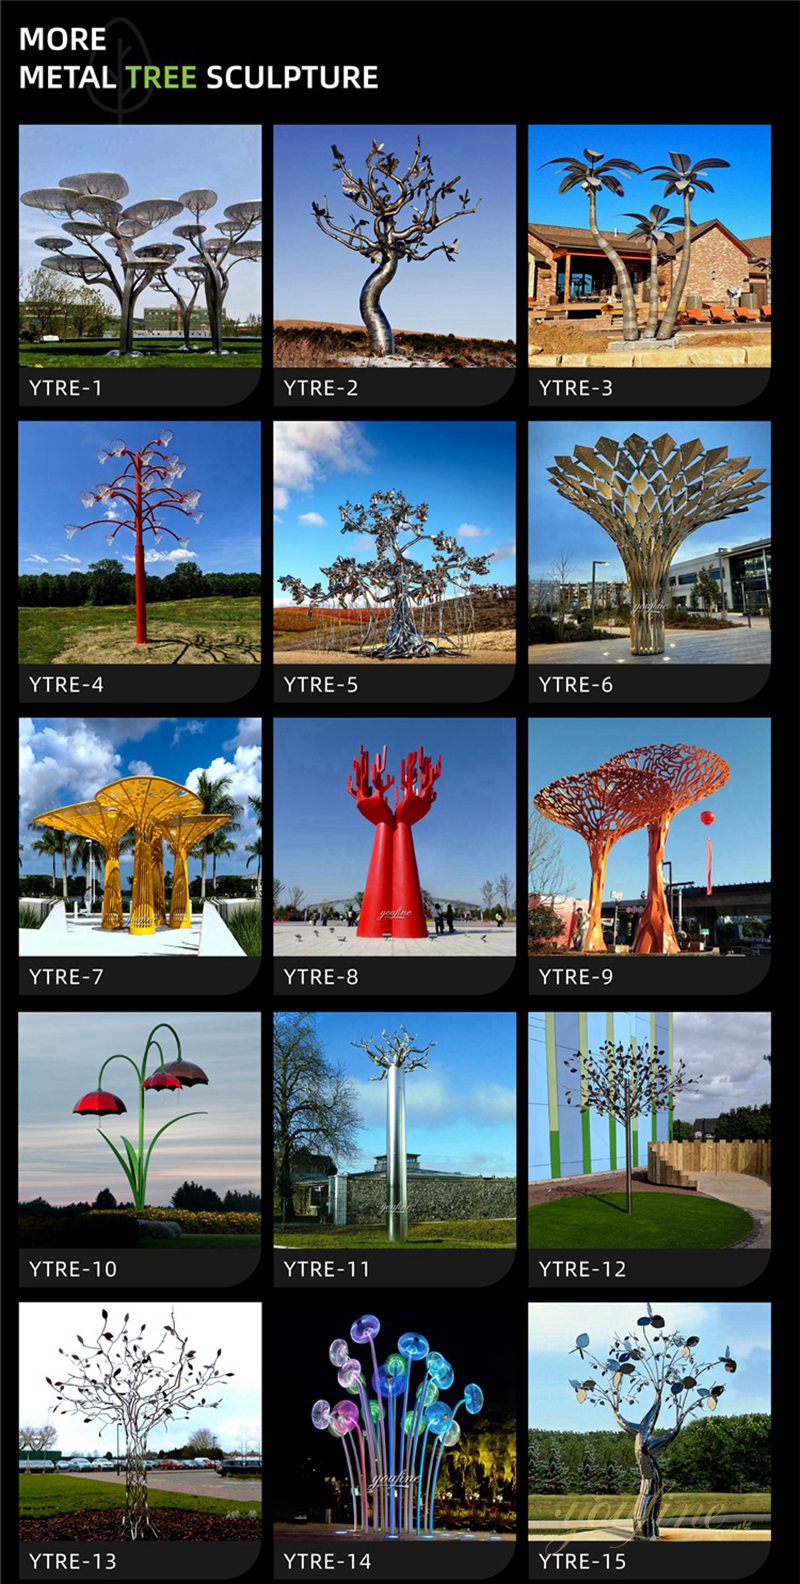 Modern Large Outdoor Metal Tree Sculpture Garden for Sale CSS-334 - Application Place/Placement - 13